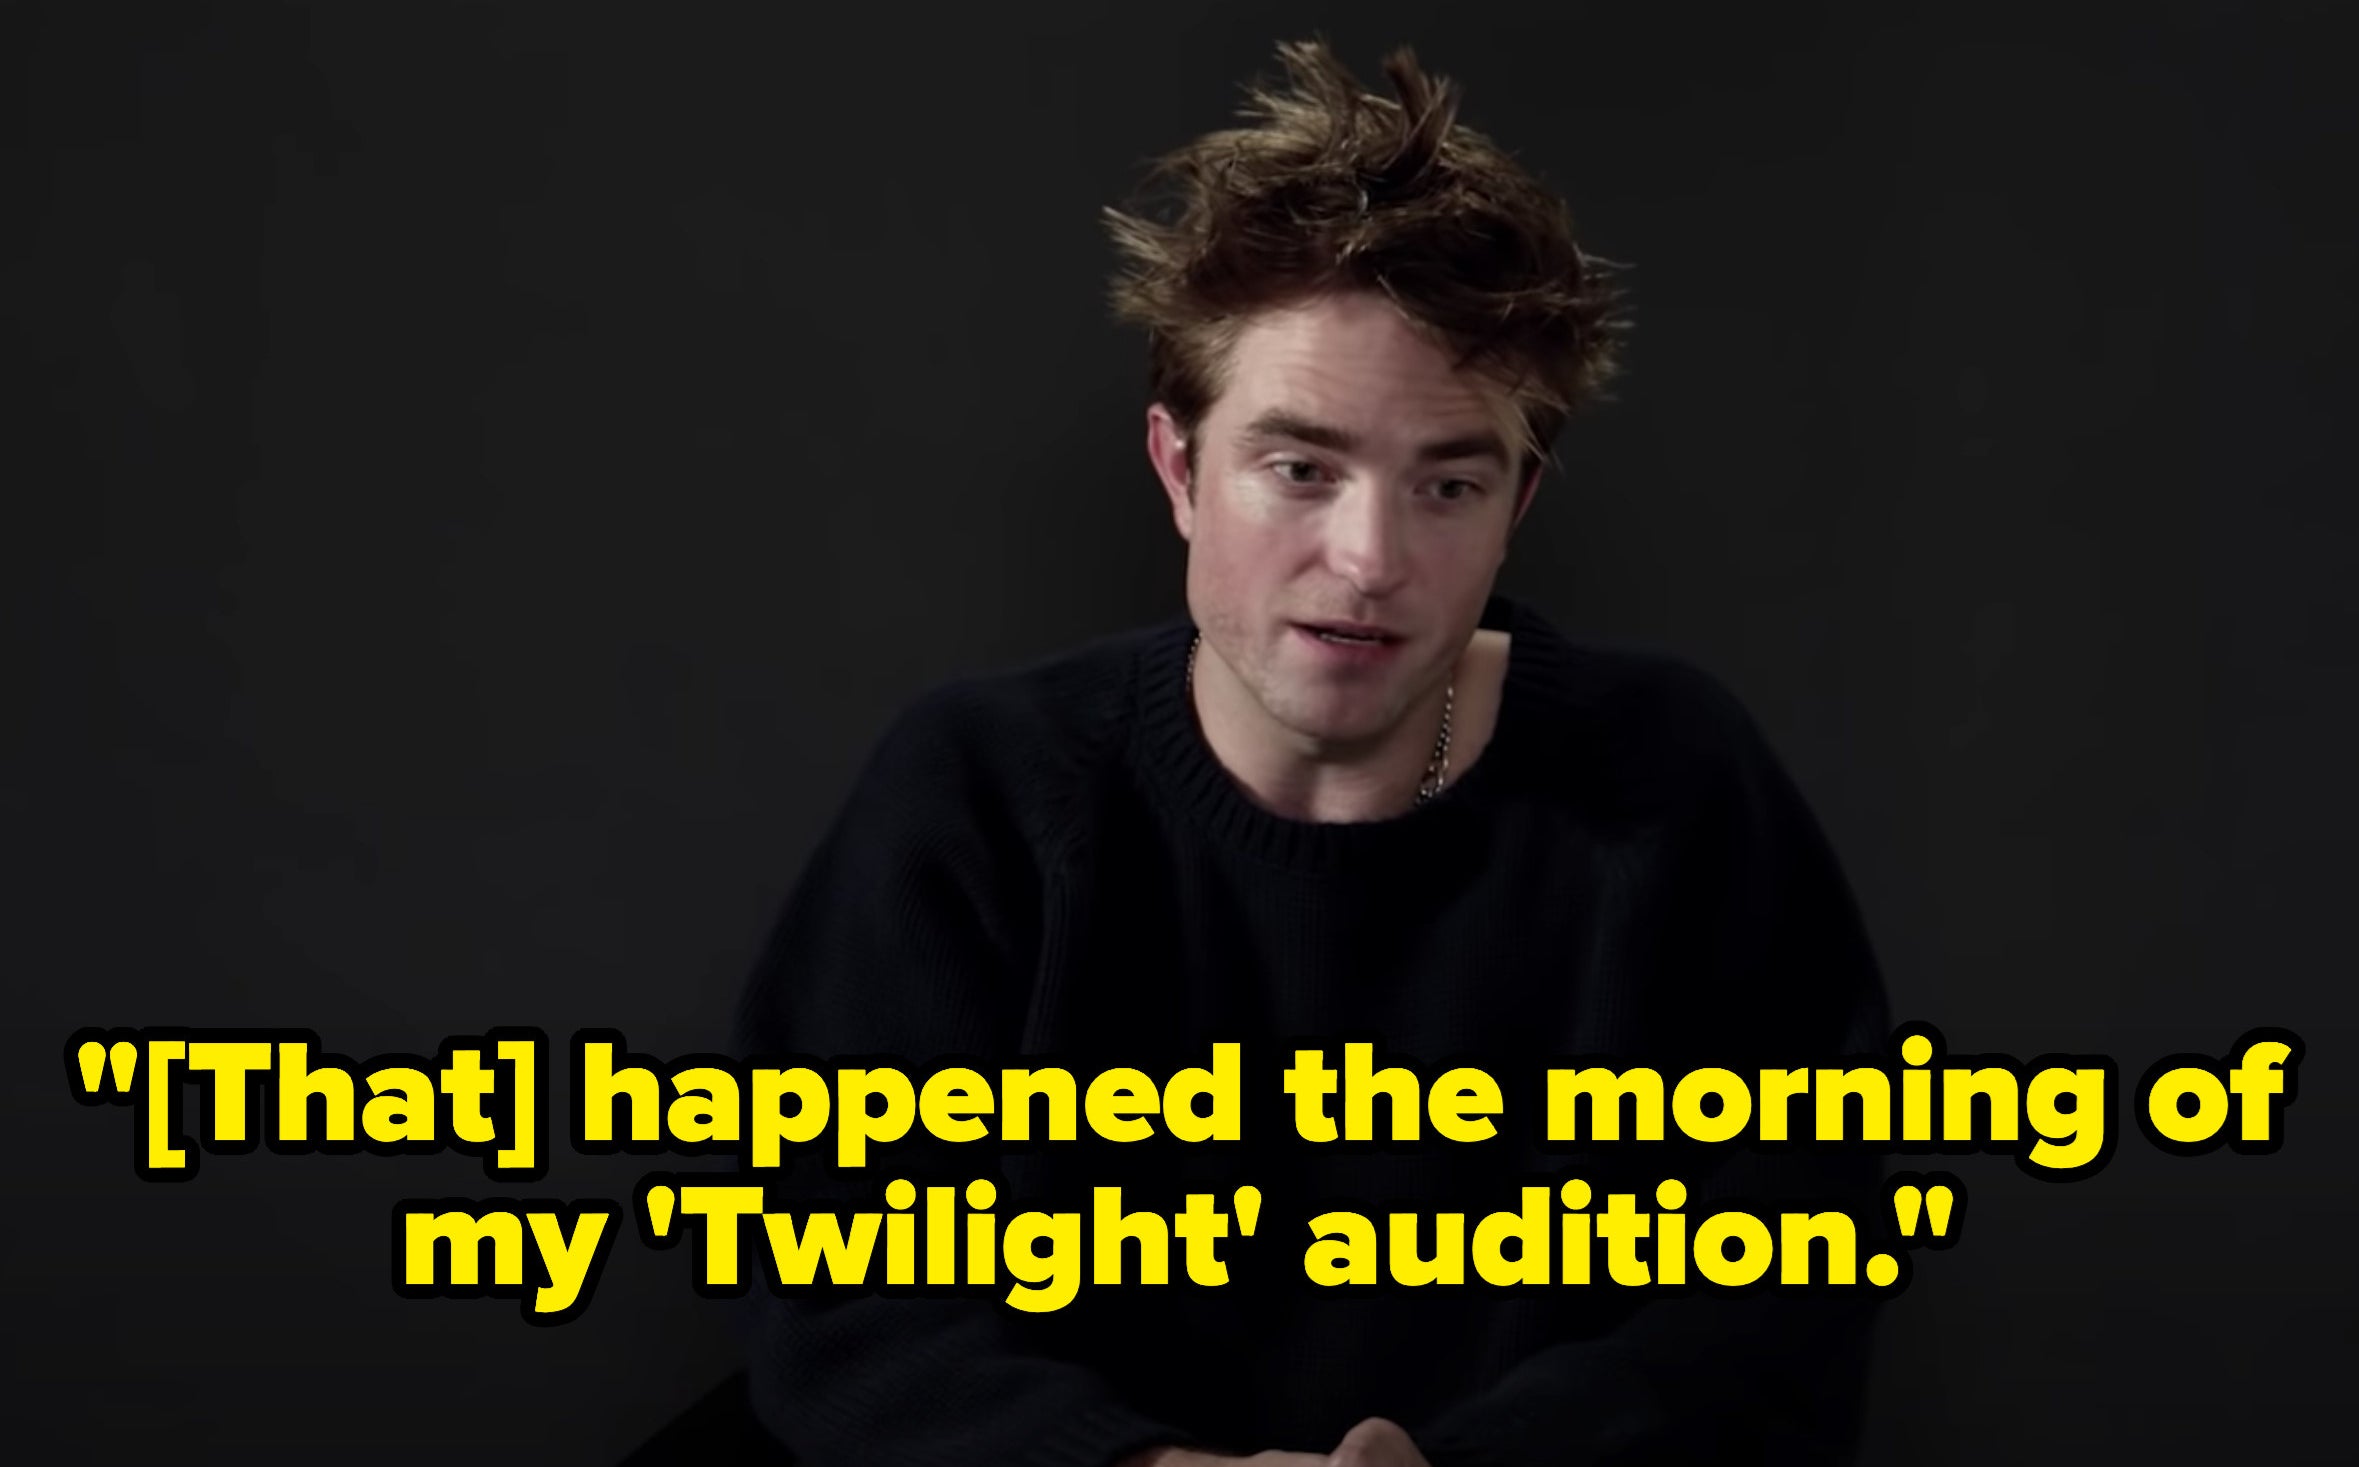 Robert Pattinson saying during his GQ interview &quot;That happened the morning of my &#x27;Twilight&#x27; audition&quot;